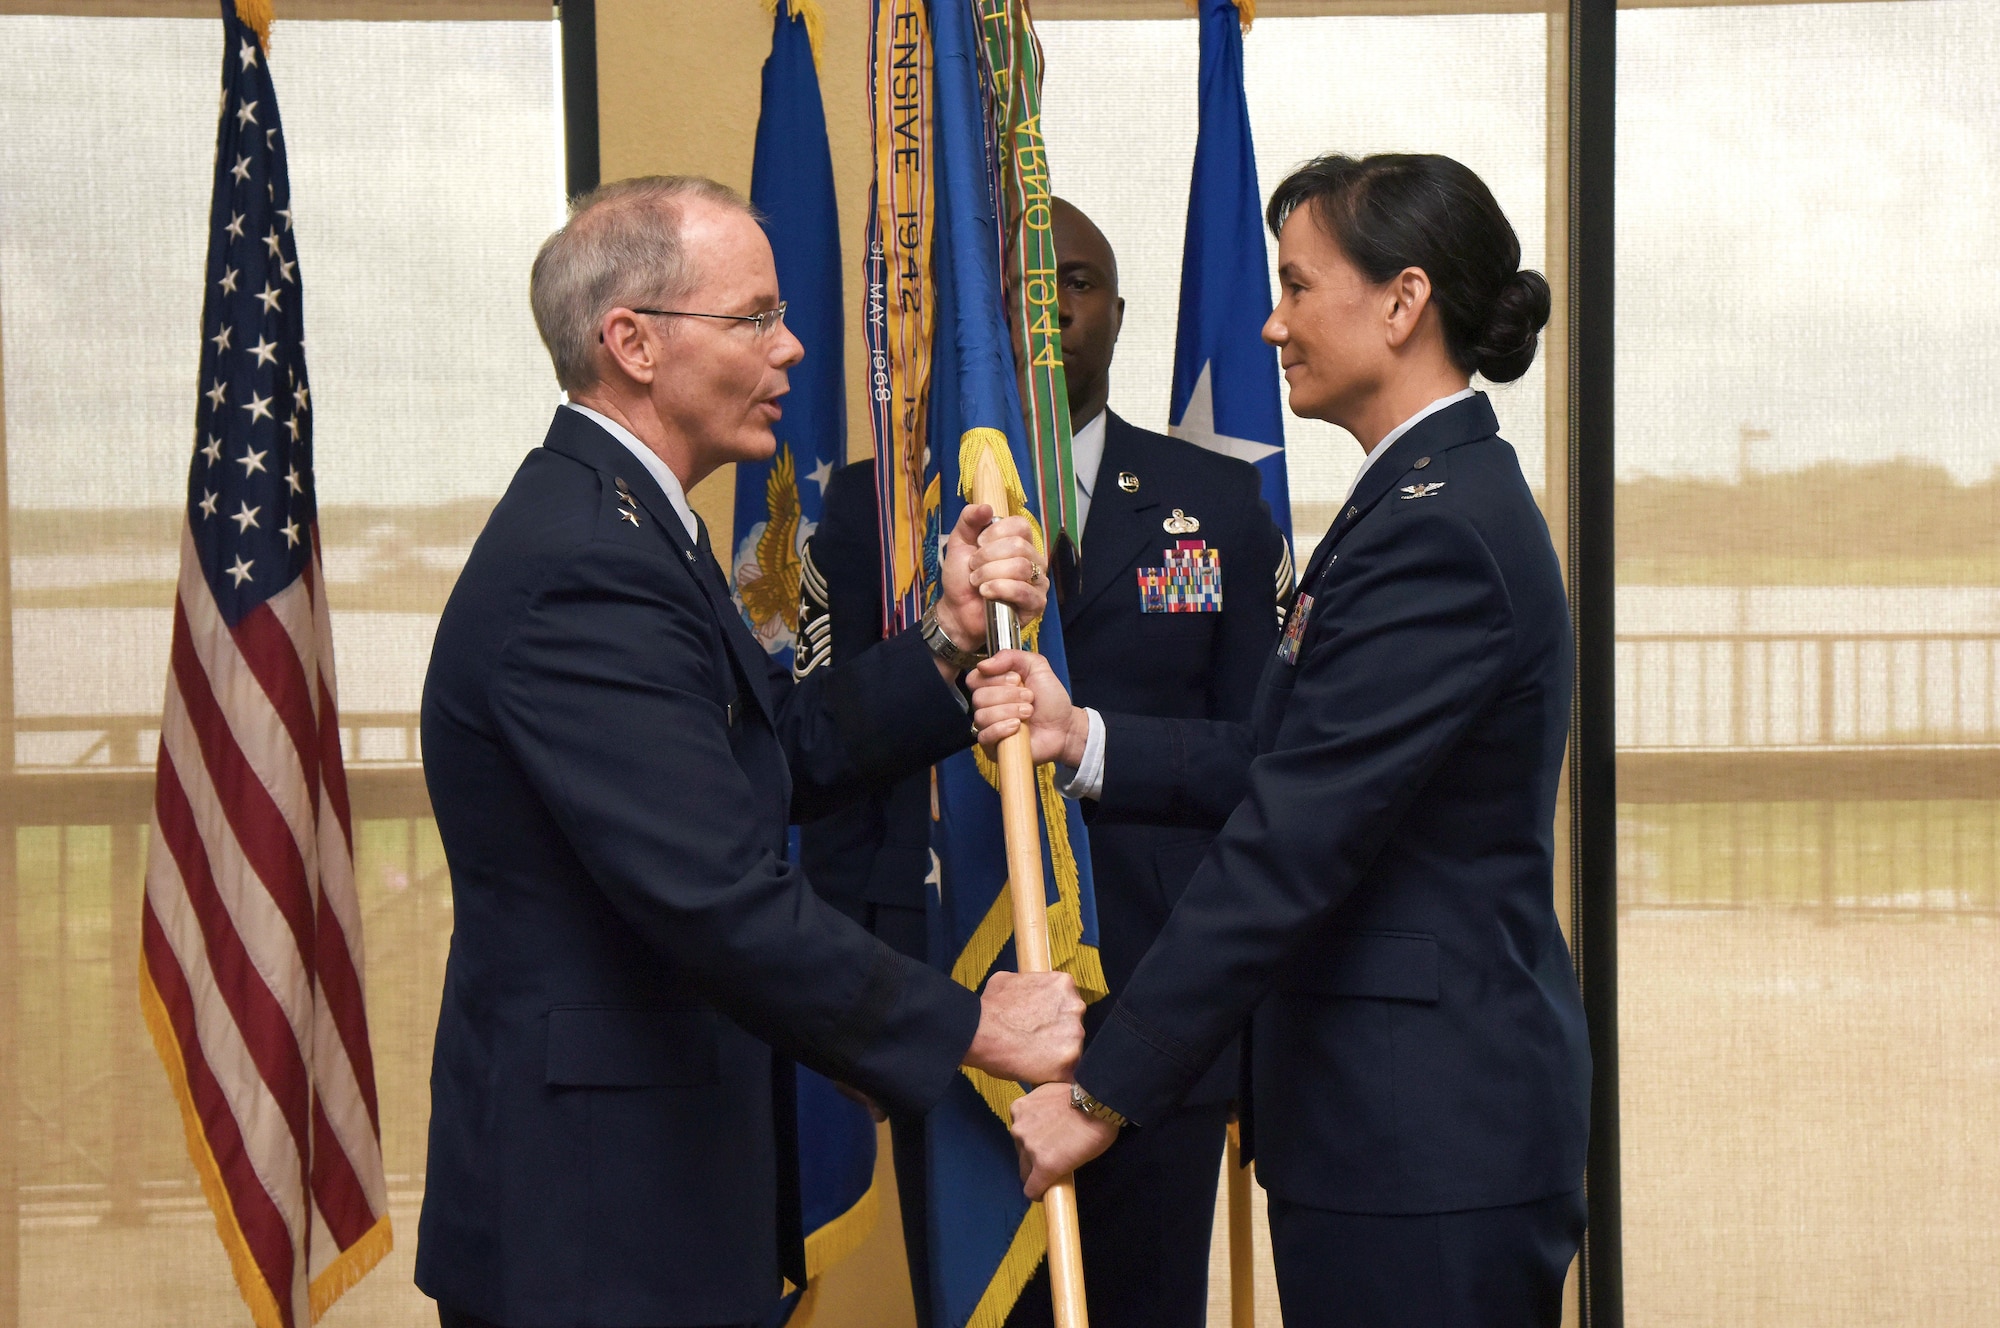 Maj. Gen. Bob LaBrutta, 2nd Air Force commander, passes the guidon to Col. Debra Lovette, 81st Training Wing commander, during a change of command ceremony at the Bay Breeze Event Center June 2, 2017, on Keesler Air Force Base, Miss. The ceremony is a symbol of command being exchanged from one commander to the next. Lovette assumed command of the 81st TRW from Col. Michele Edmondson. (U.S. Air Force photo by Kemberly Groue)